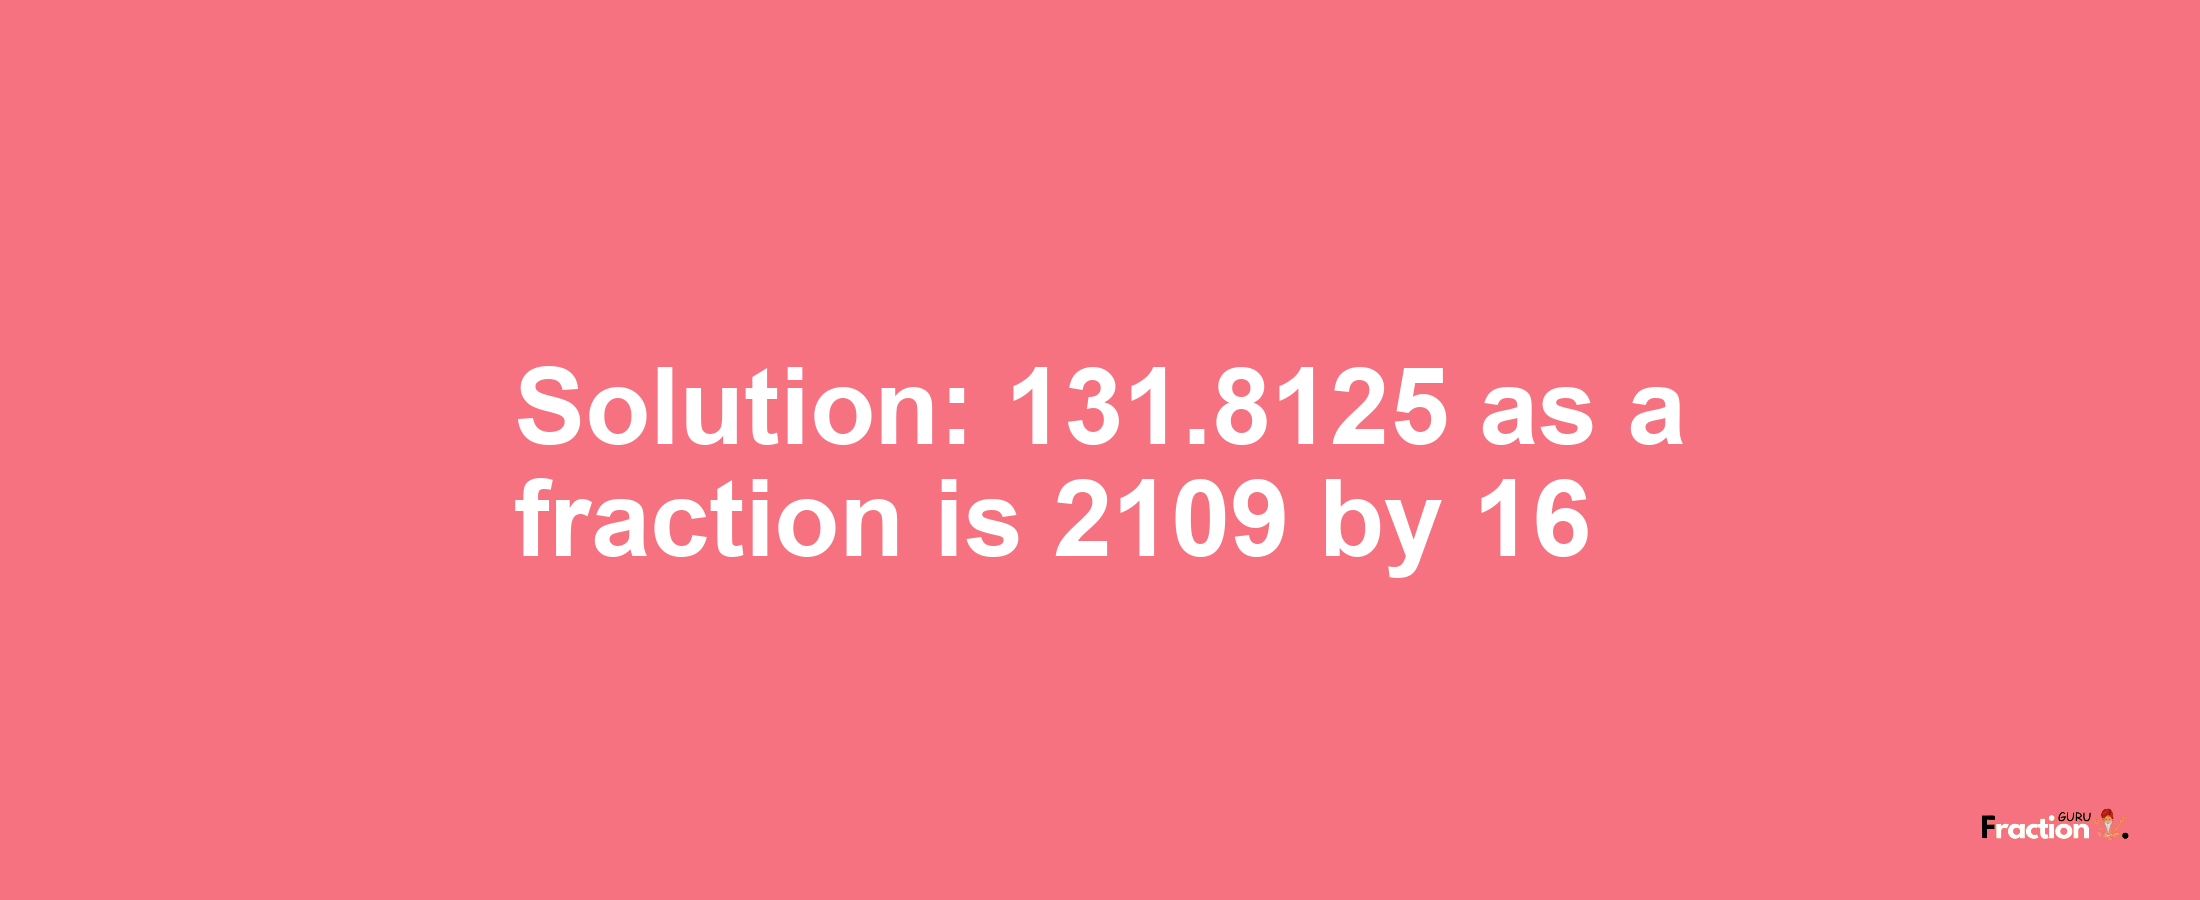 Solution:131.8125 as a fraction is 2109/16